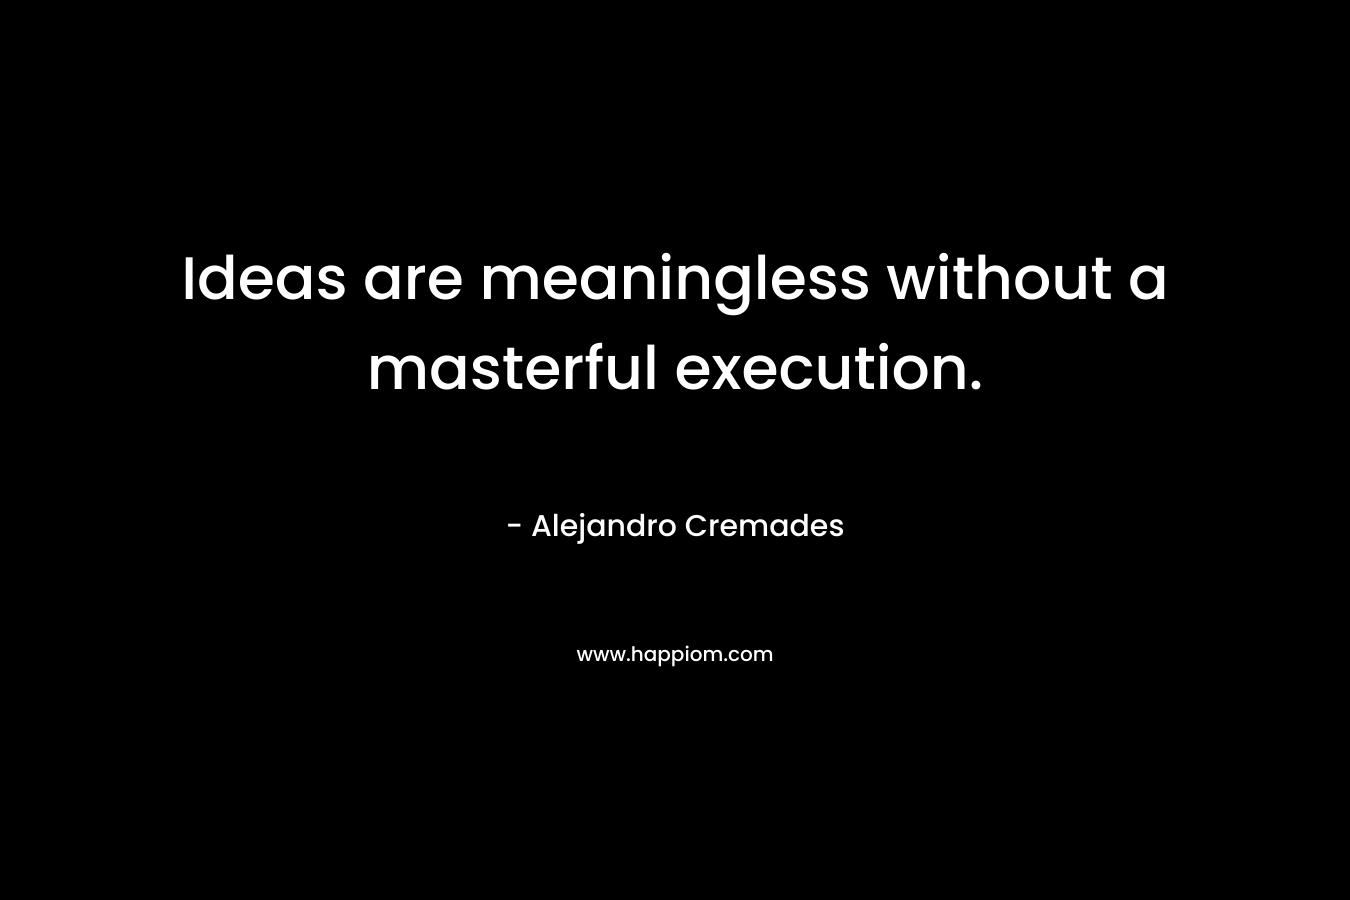 Ideas are meaningless without a masterful execution.